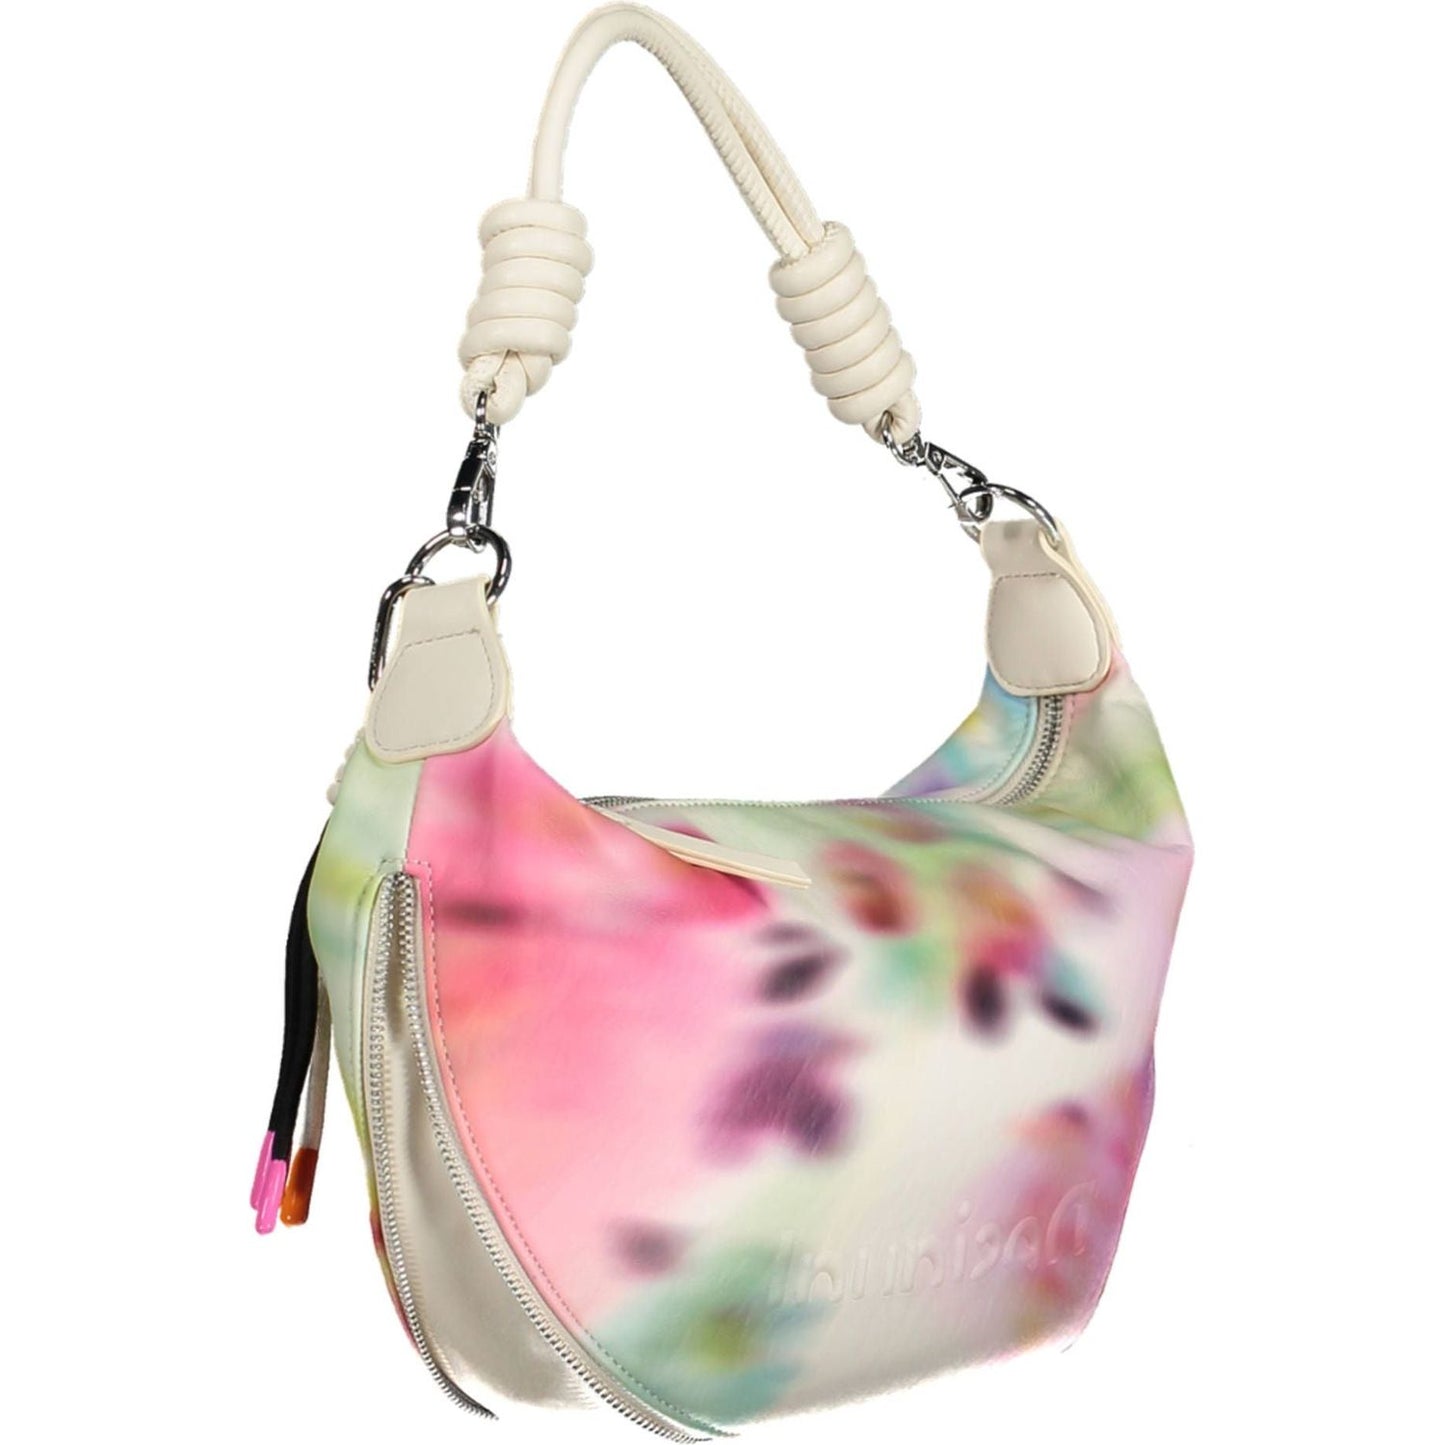 Chic White Expandable Handbag with Contrasting Accents